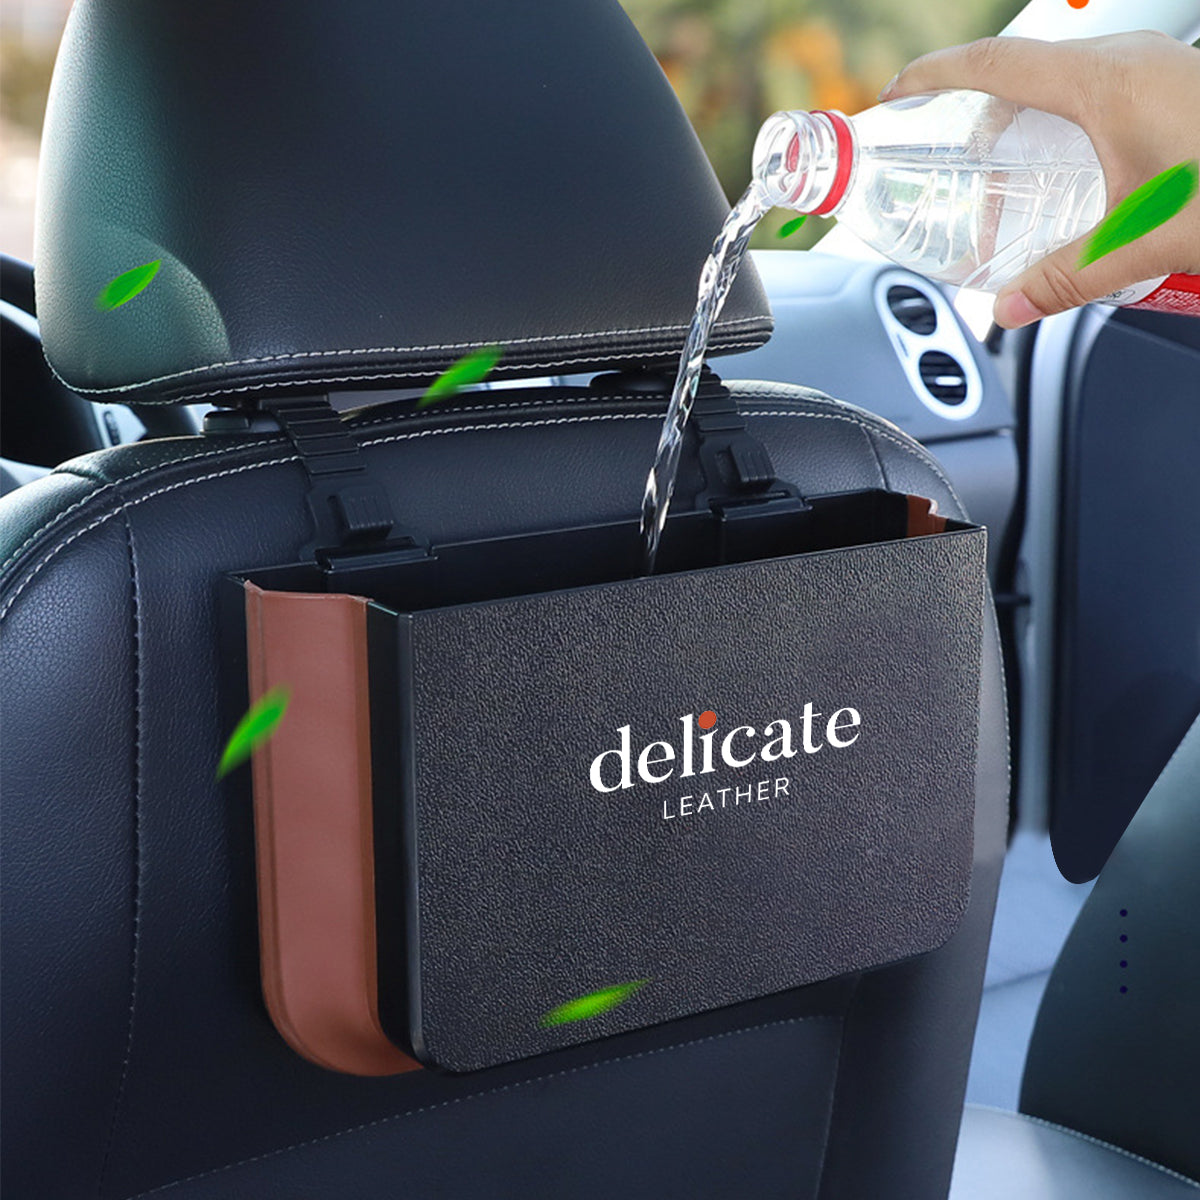 Hanging Waterproof Car Trash can-Foldable, Custom For Your Cars, Waterproof, and Equipped with Cup Holders and Trays. Multi-Purpose, Car Accessories KO11992